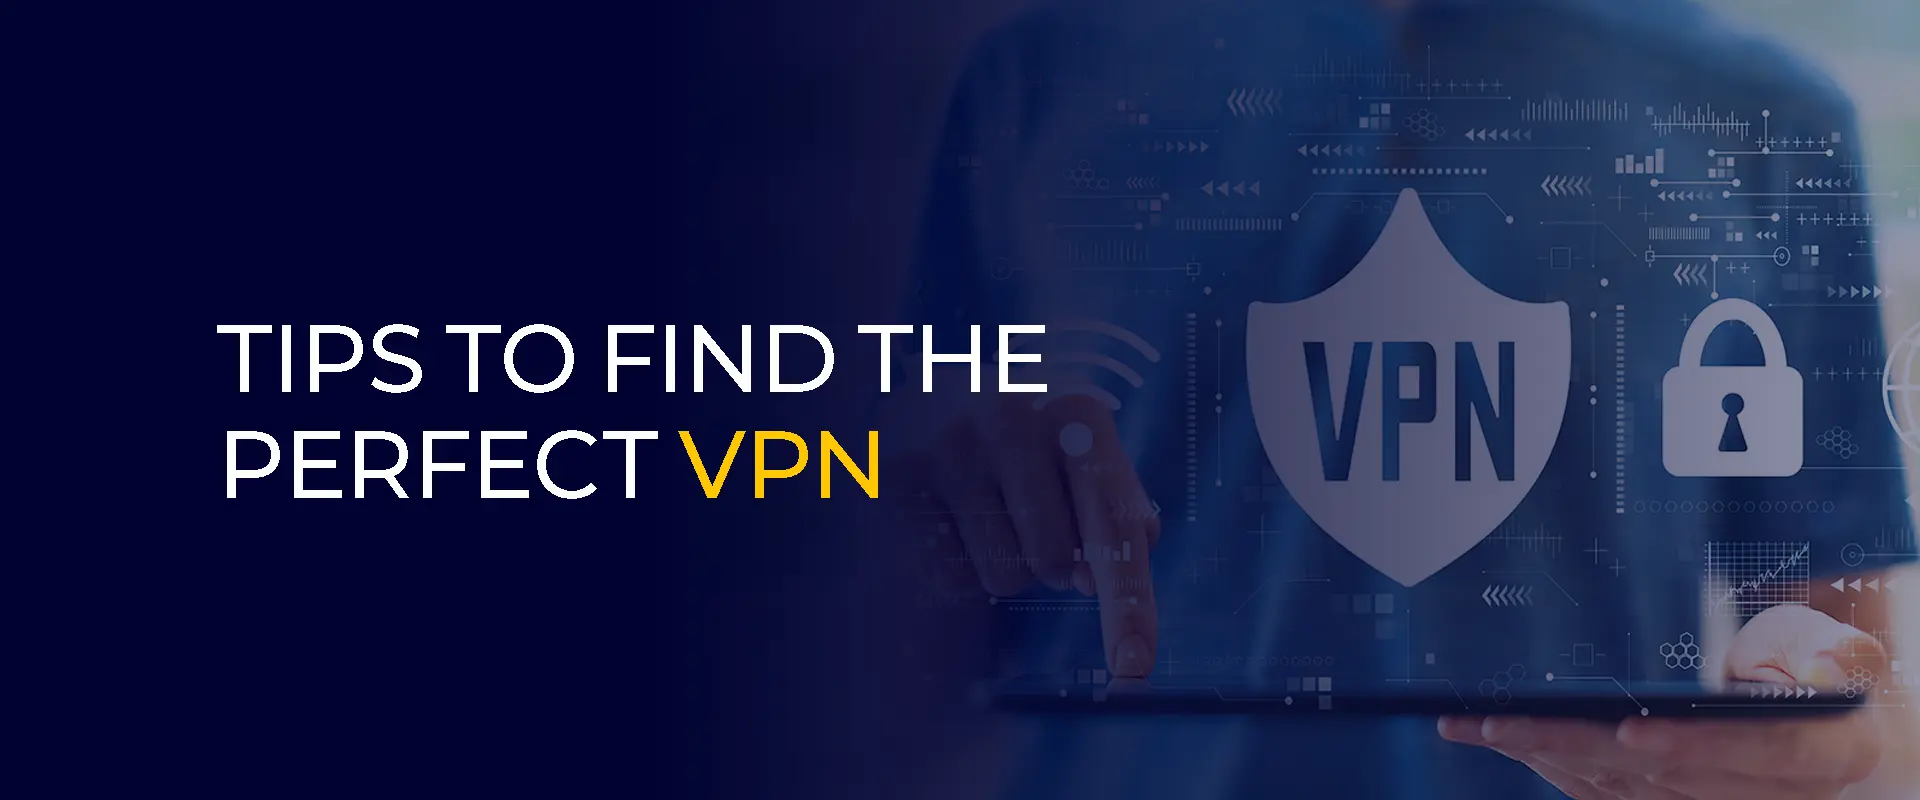 Tips to Find the Perfect VPN